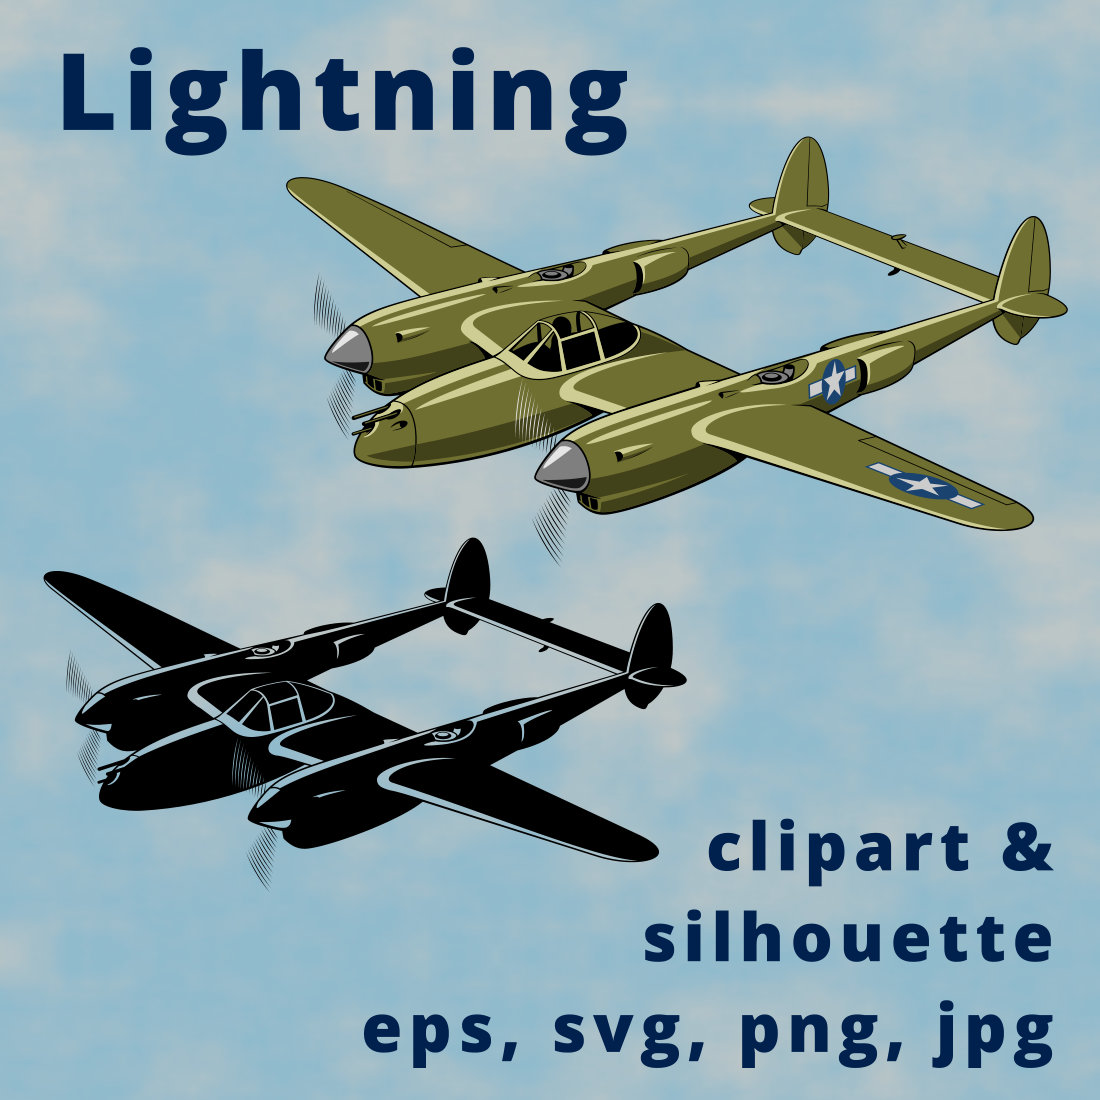 Lightning USA Fighter Plane Clipart cover image.